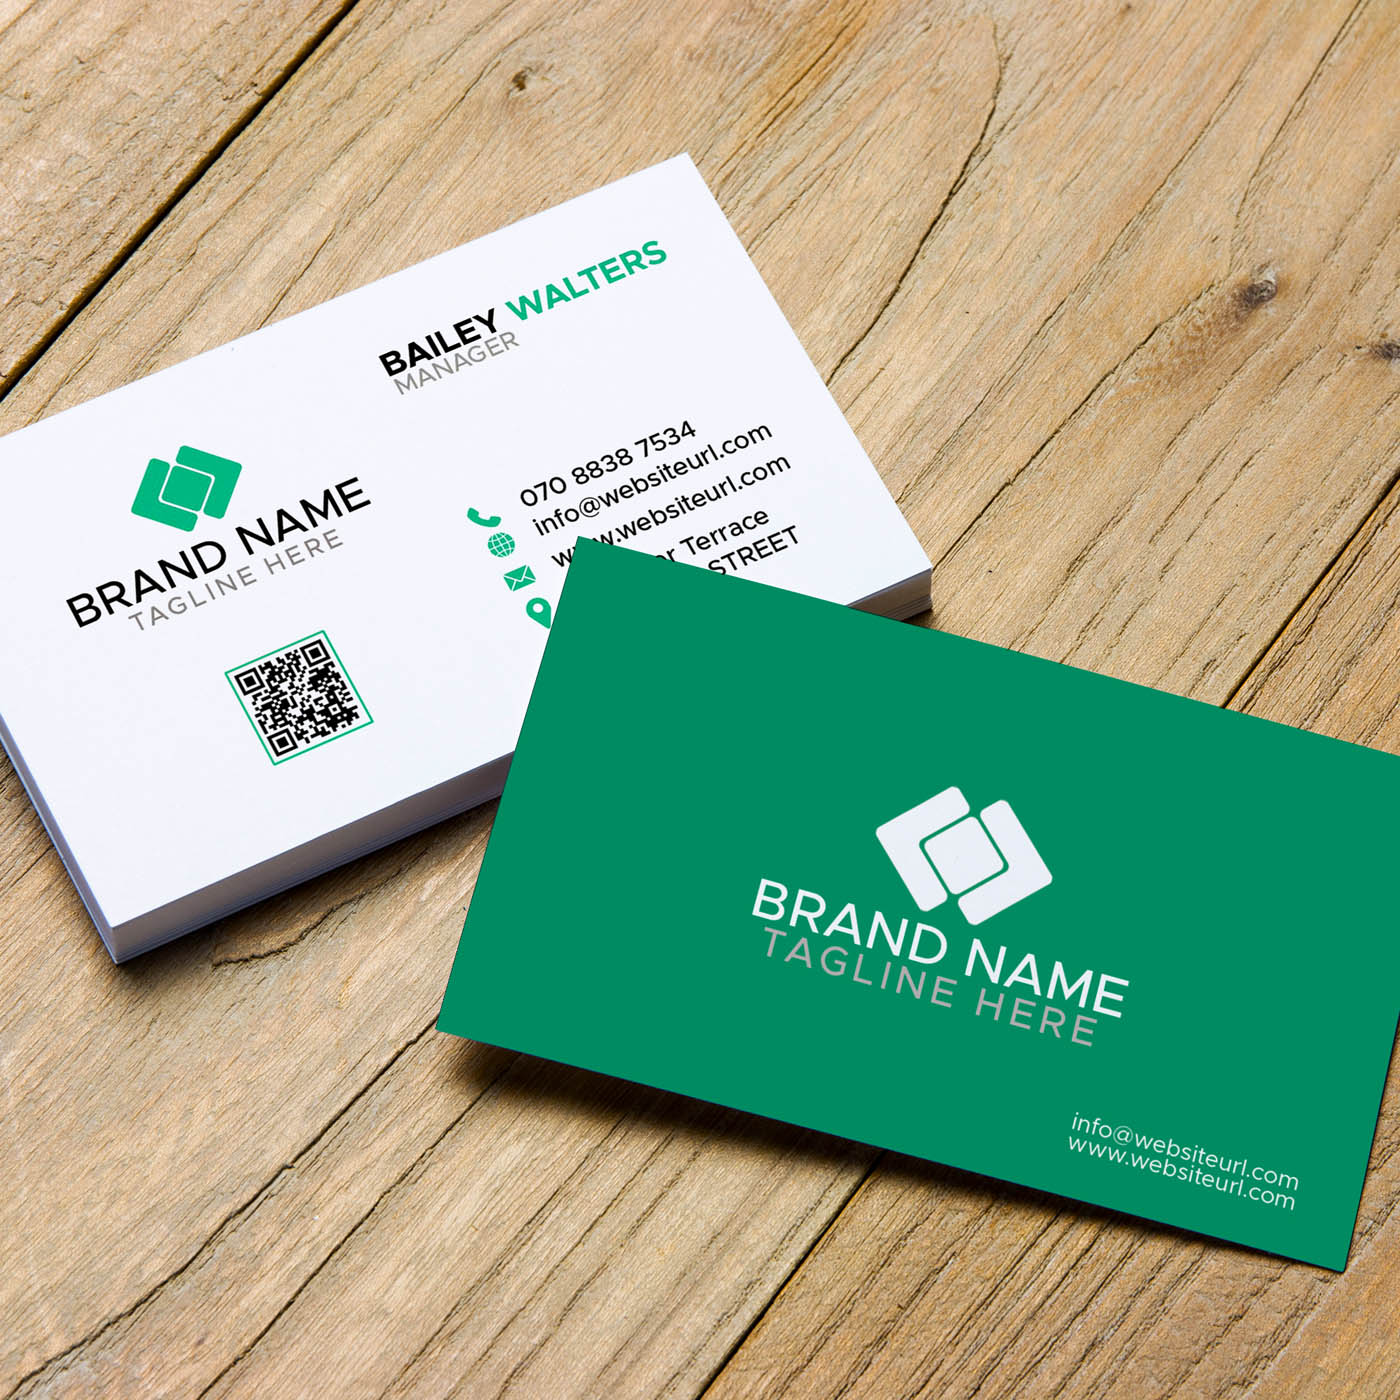 Corporate & Modern Business Card Template In 3 Color.